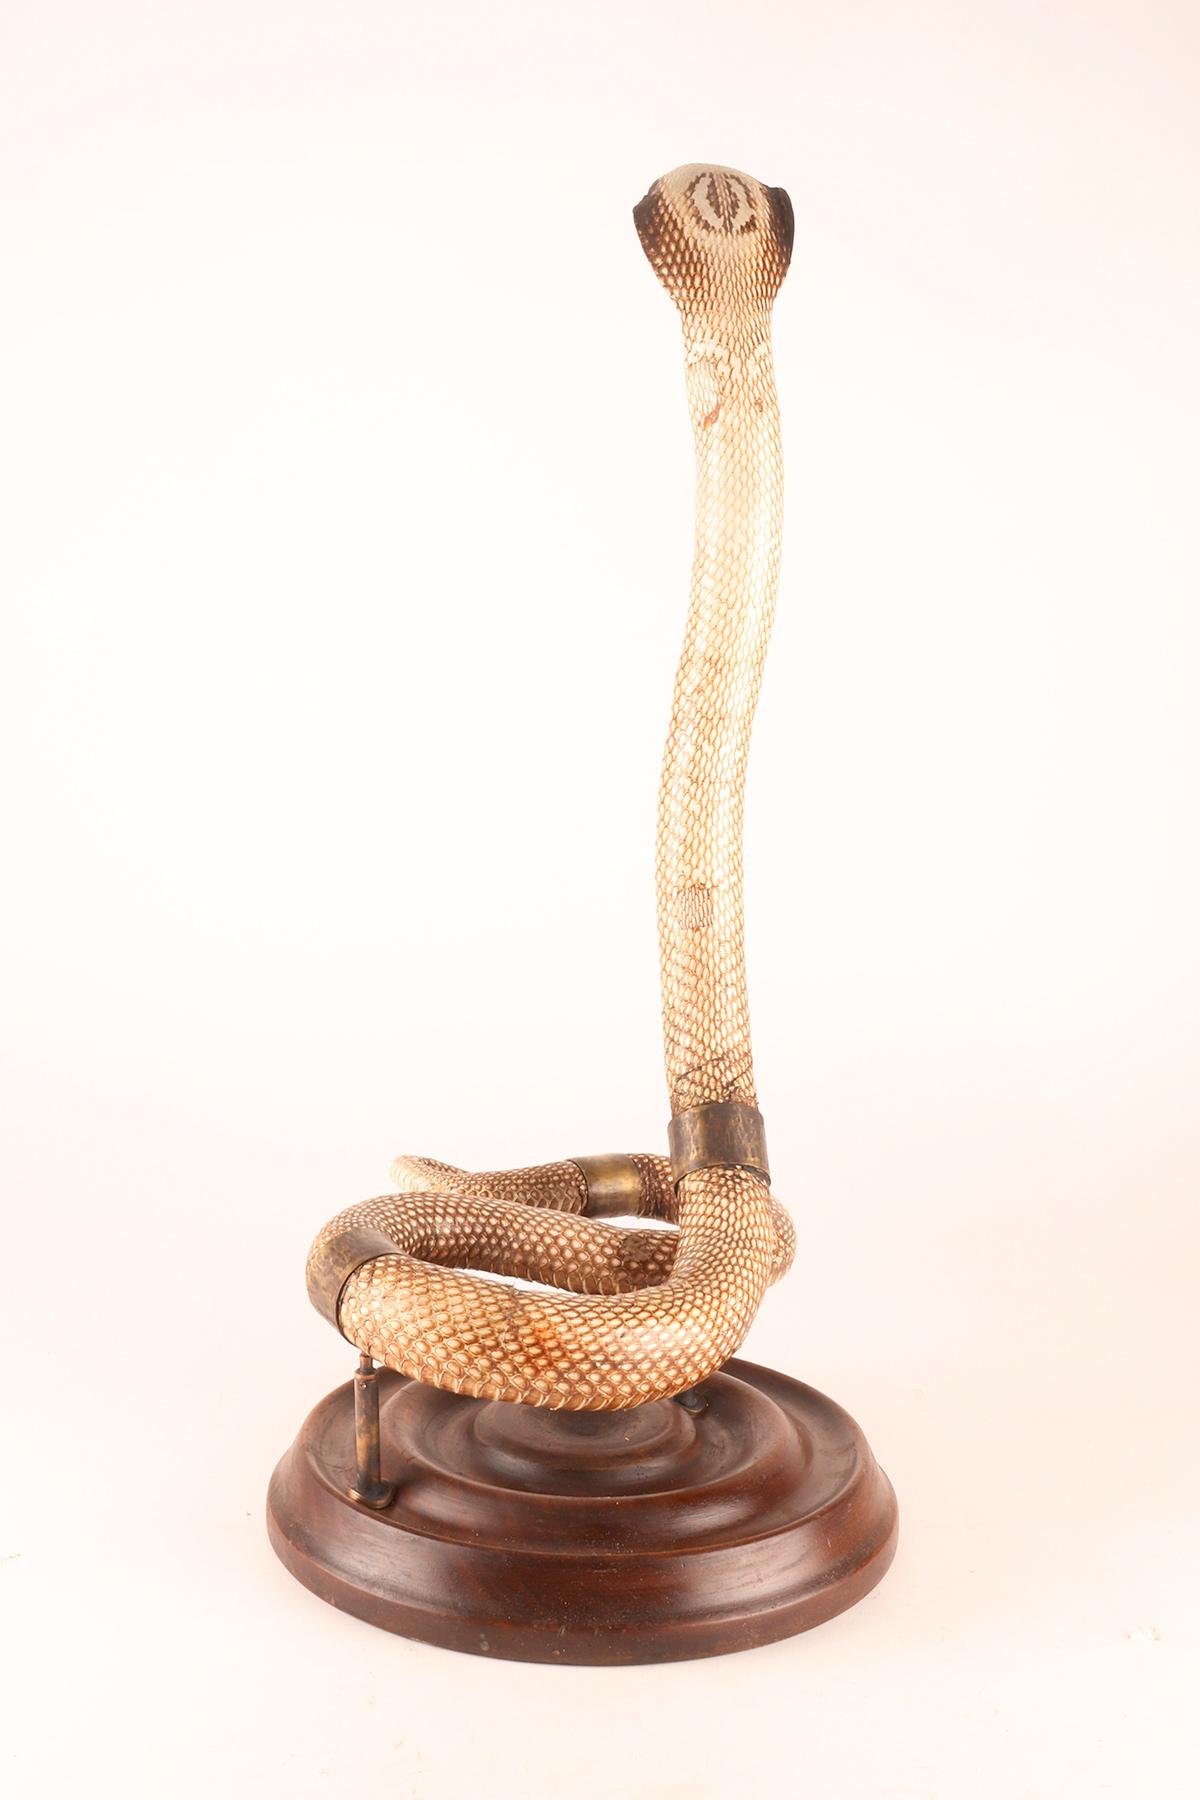 A specimen of Hemachatus hemachatus snake taxidermy, Italy 1890. For Sale 1